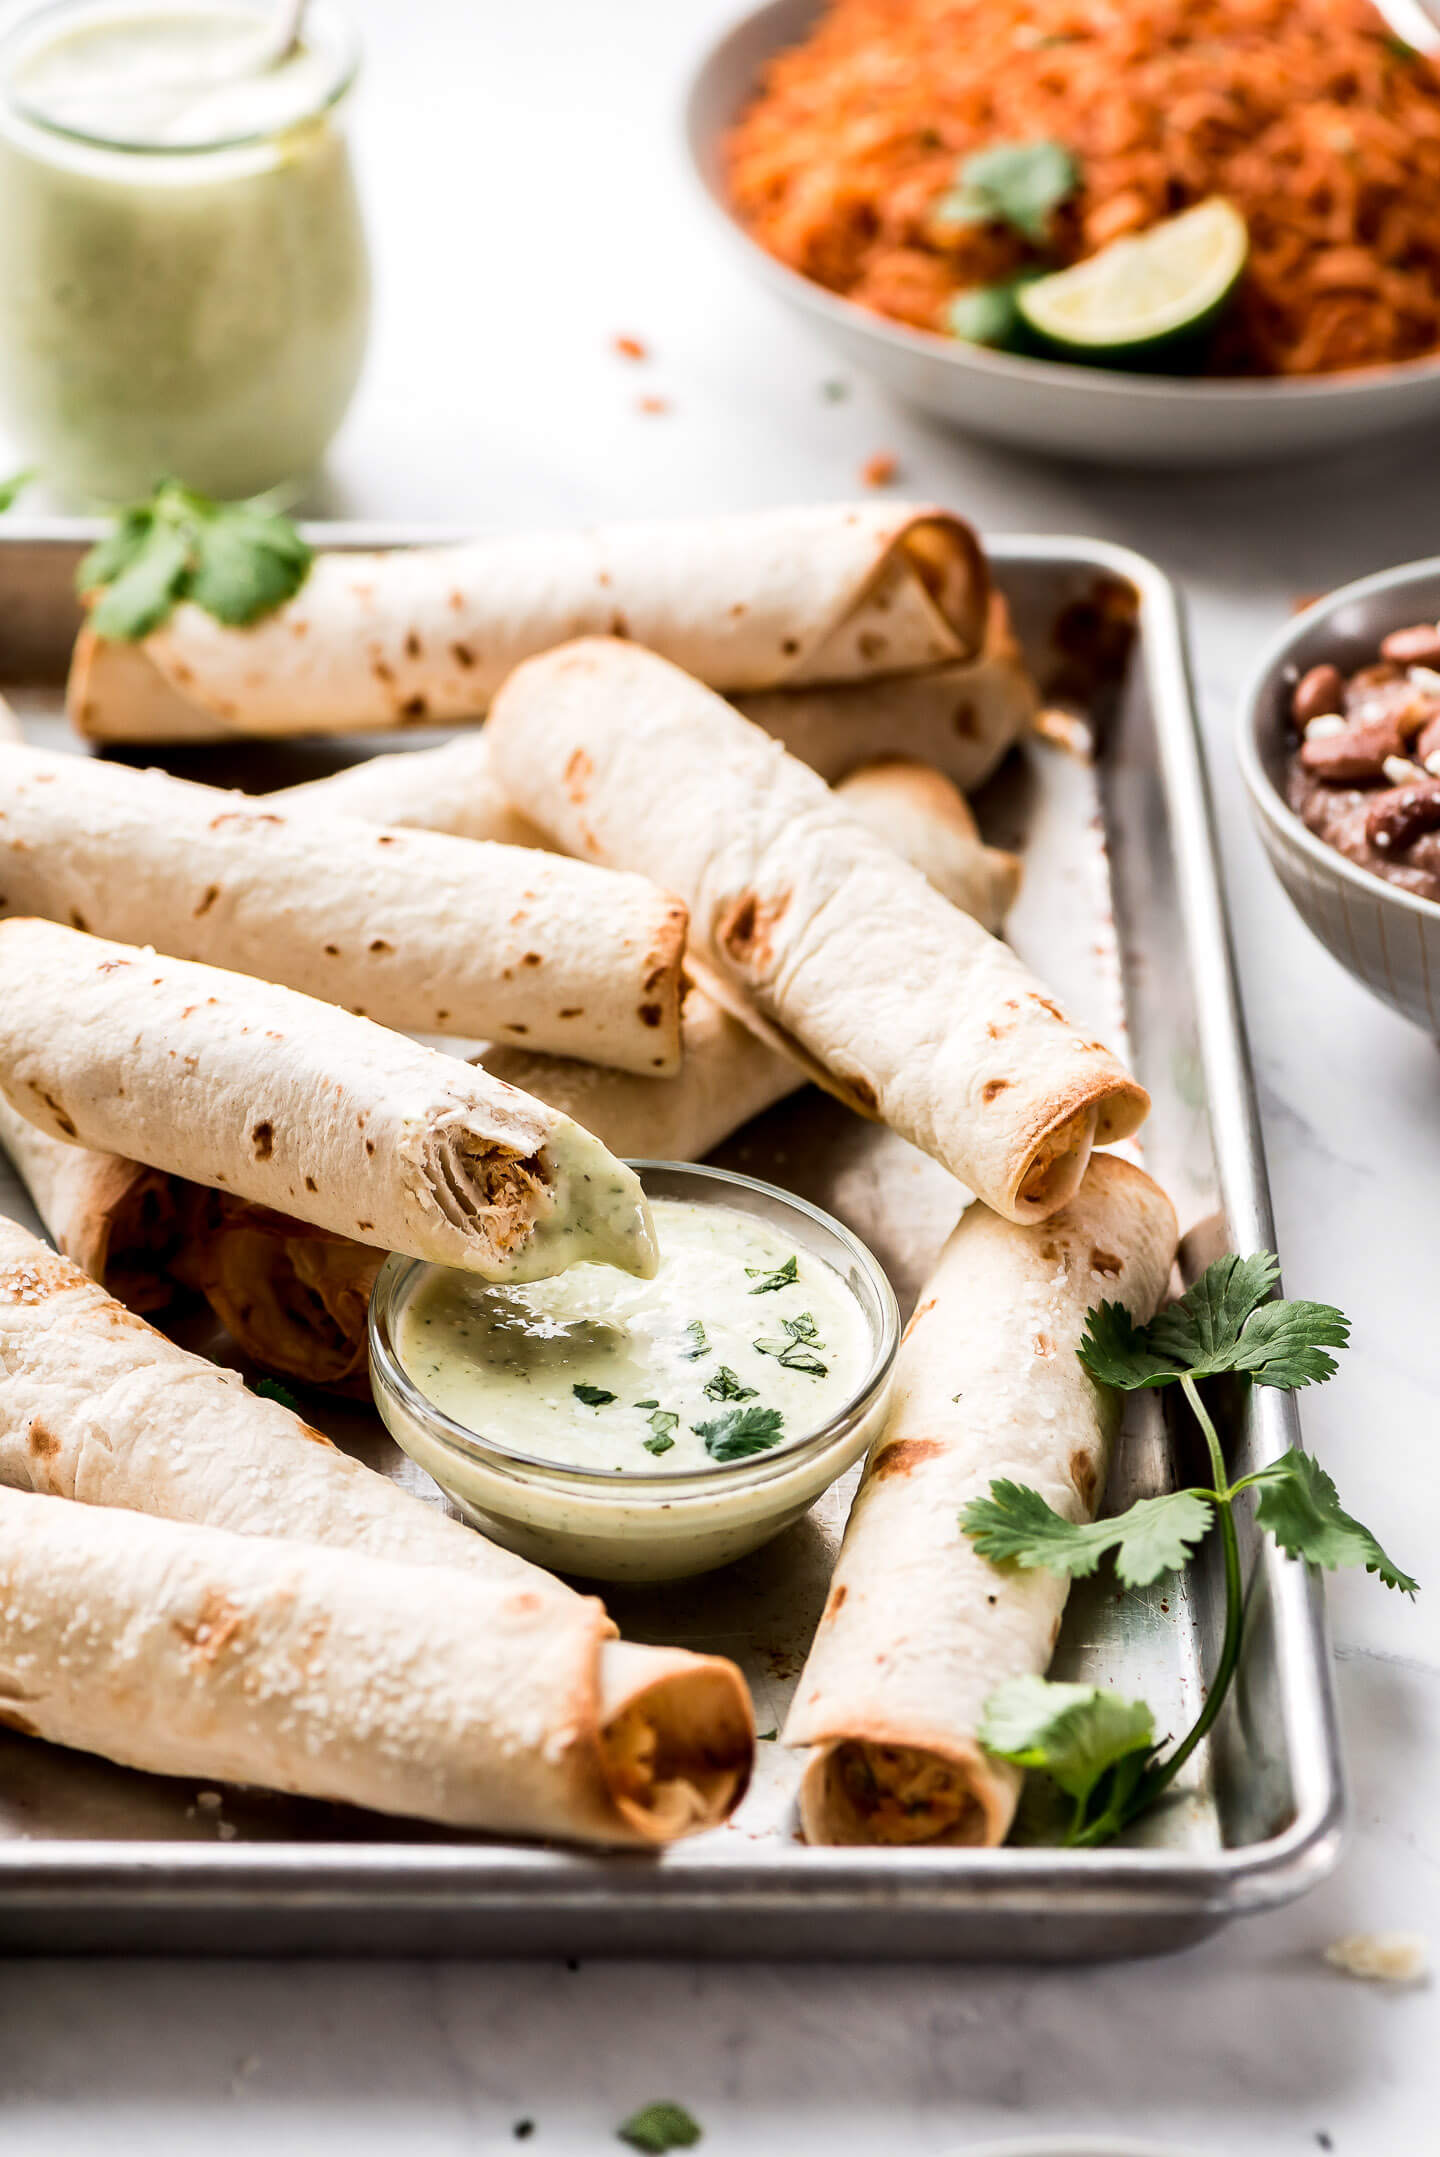 Many Chicken Taquitos on a baking sheet with dipping sauce and rice and beans in bowls in the background.